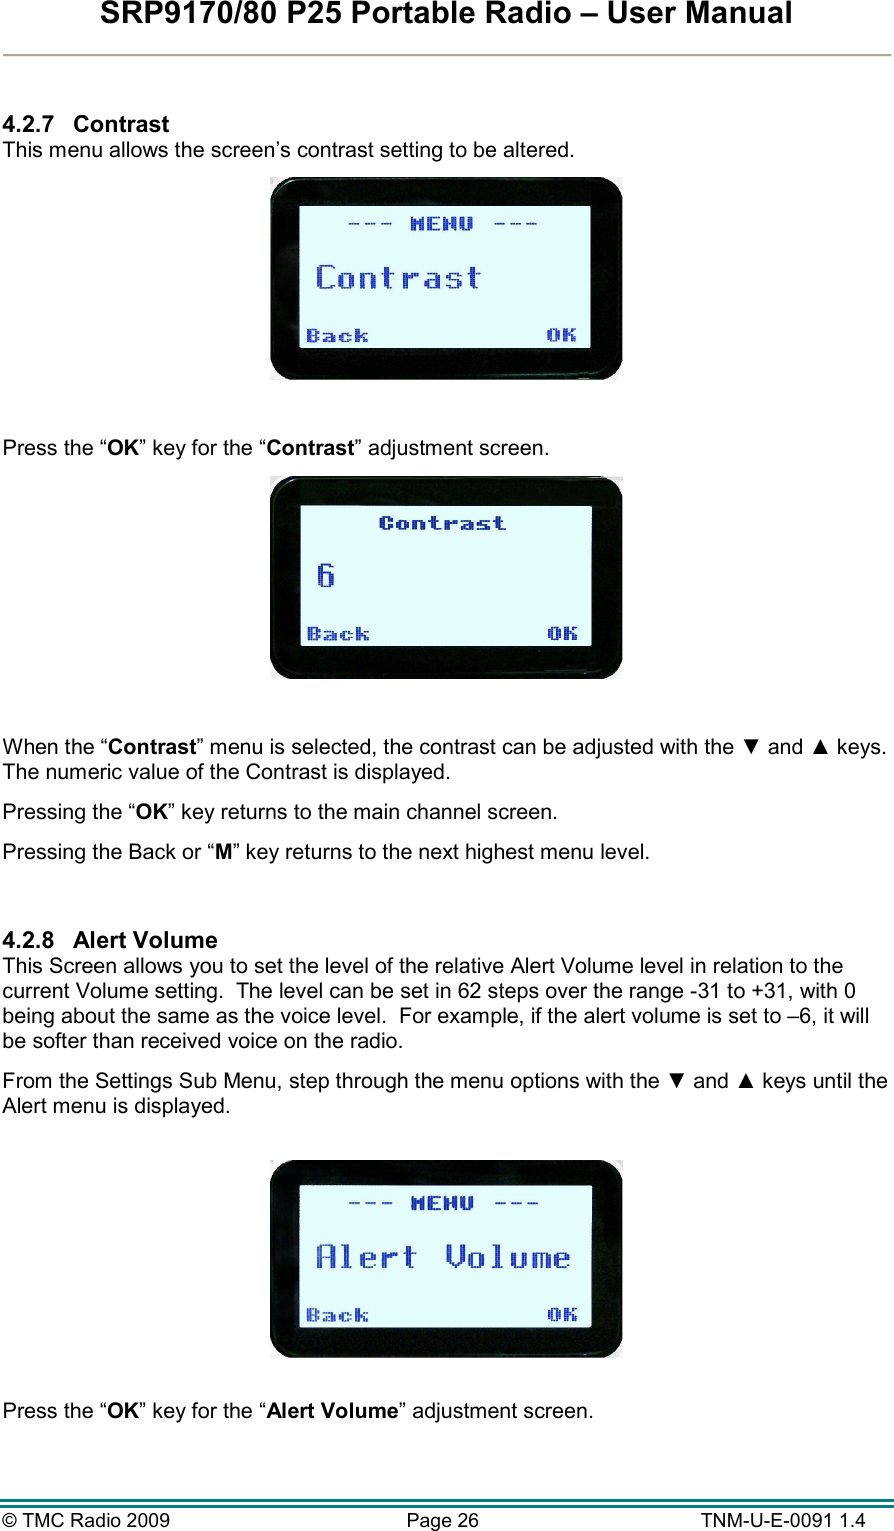 SRP9170/80 P25 Portable Radio – User Manual  © TMC Radio 2009  Page 26   TNM-U-E-0091 1.4  4.2.7  Contrast This menu allows the screen’s contrast setting to be altered.    Press the “OK” key for the “Contrast” adjustment screen.   When the “Contrast” menu is selected, the contrast can be adjusted with the ▼ and ▲ keys.  The numeric value of the Contrast is displayed.  Pressing the “OK” key returns to the main channel screen.   Pressing the Back or “M” key returns to the next highest menu level.  4.2.8  Alert Volume This Screen allows you to set the level of the relative Alert Volume level in relation to the current Volume setting.  The level can be set in 62 steps over the range -31 to +31, with 0 being about the same as the voice level.  For example, if the alert volume is set to –6, it will be softer than received voice on the radio.   From the Settings Sub Menu, step through the menu options with the ▼ and ▲ keys until the Alert menu is displayed.    Press the “OK” key for the “Alert Volume” adjustment screen.  